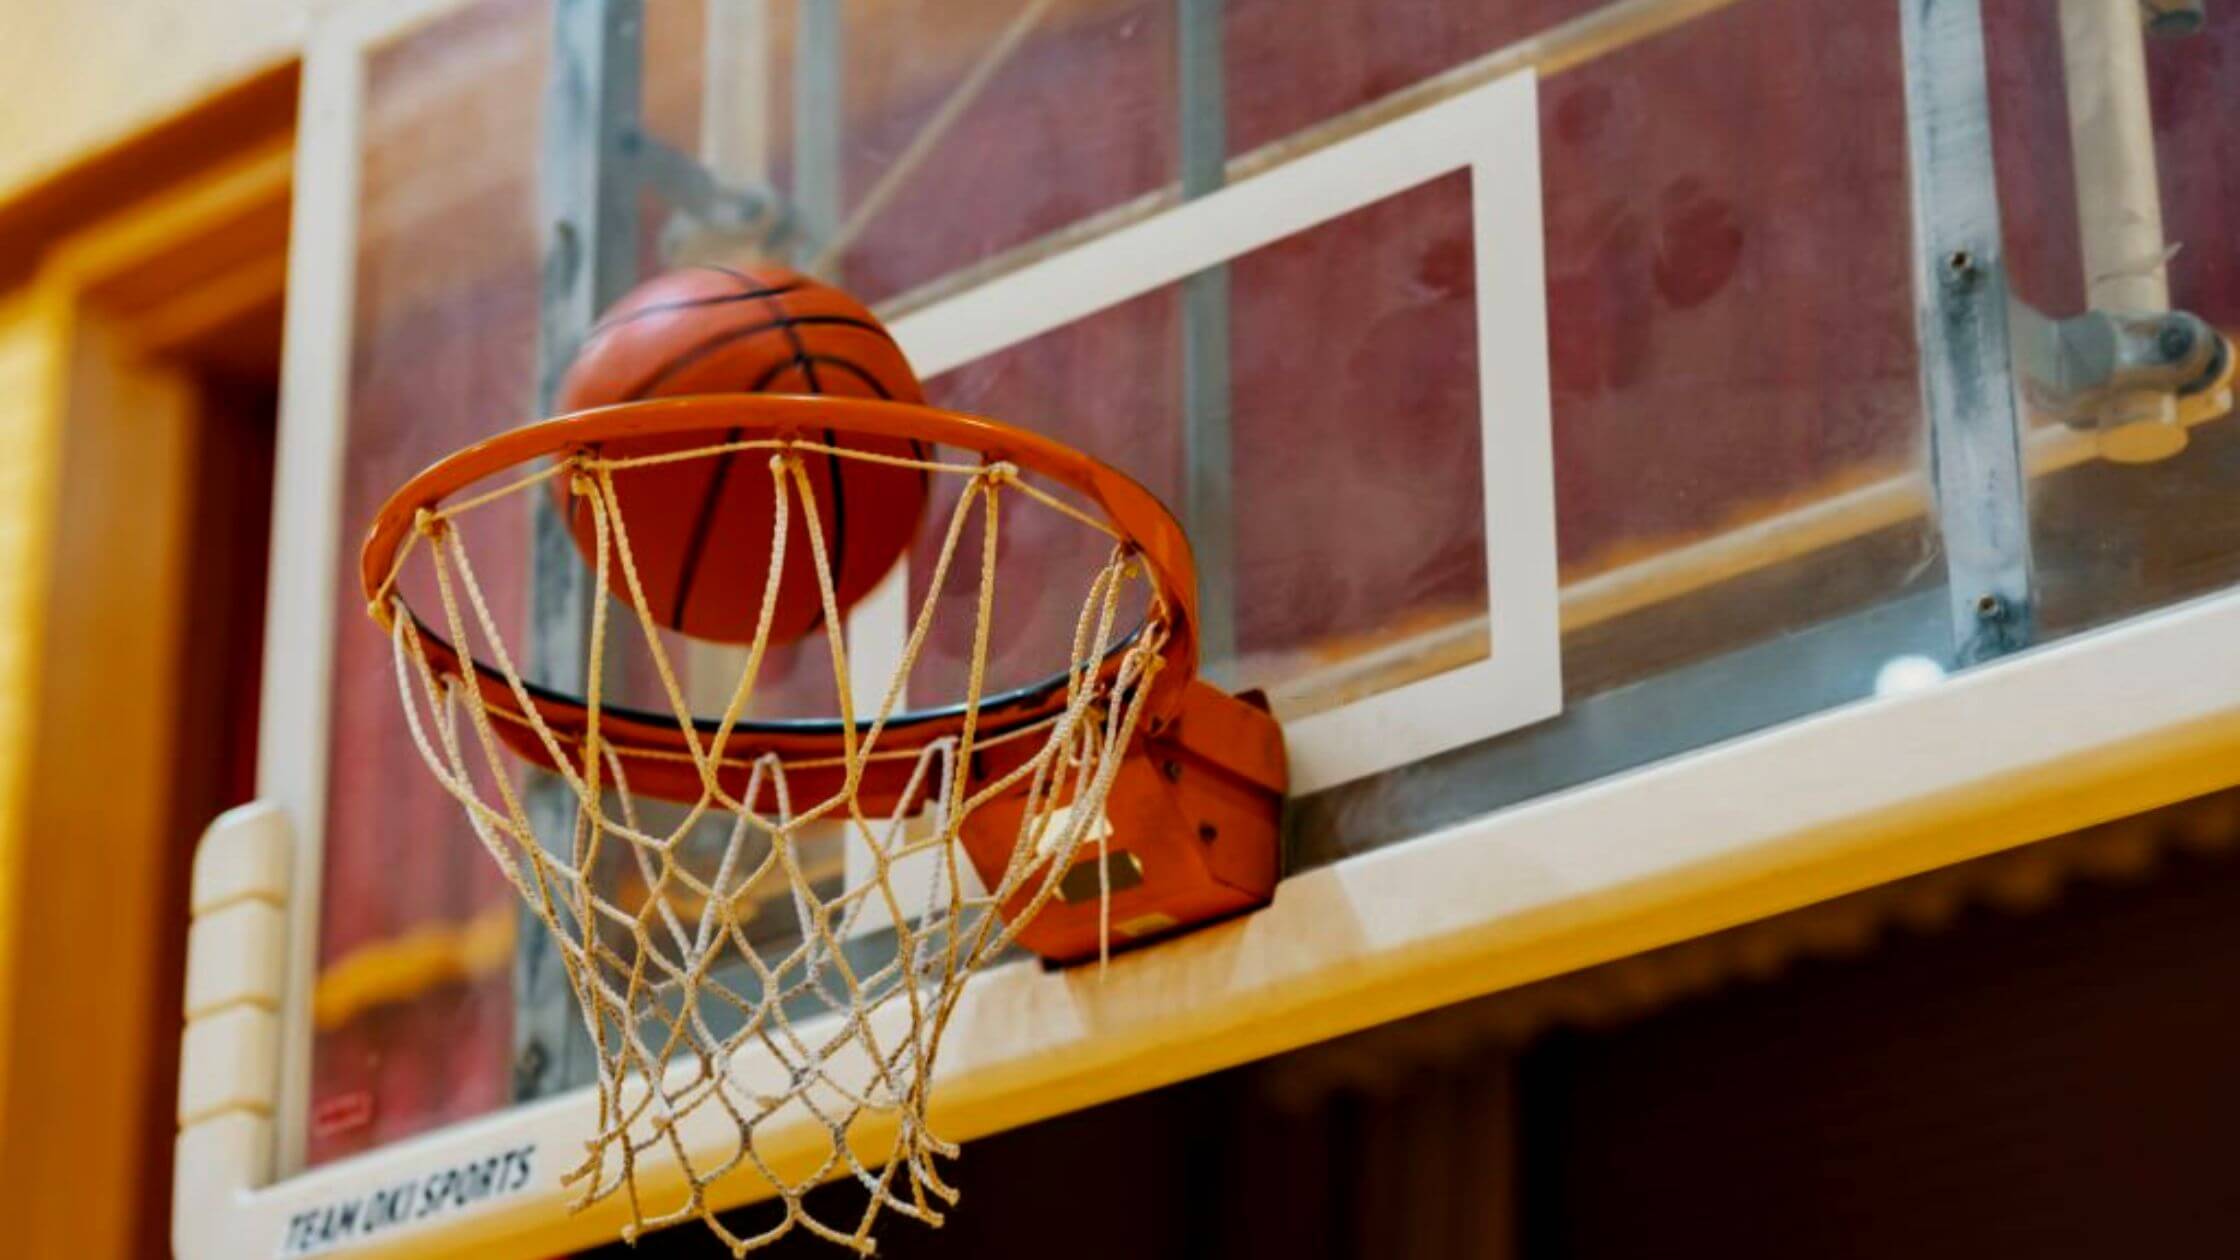 A 60-Year-Old Dies After A Brawl Breaks Out At A Middle School Basketball Game